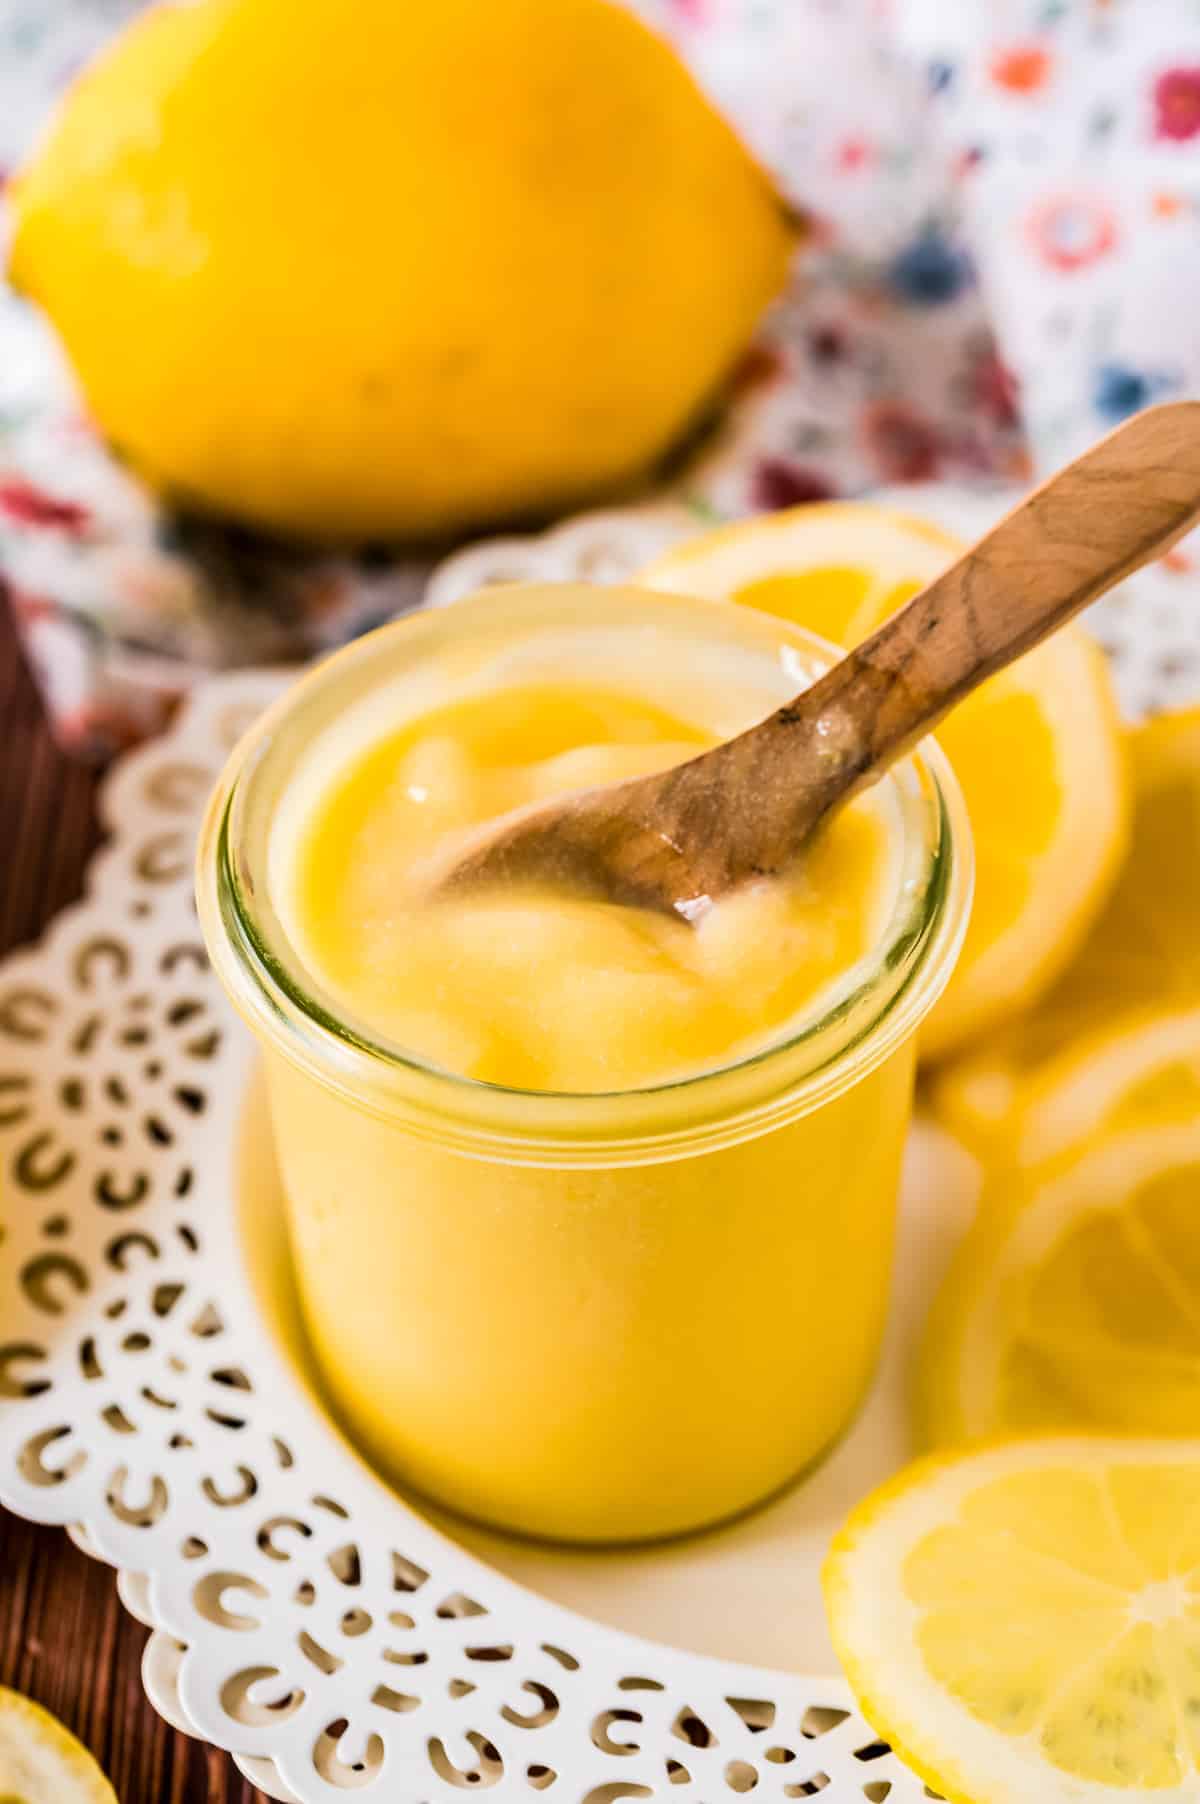 Lemon Curd in a small glass jar with small wooden spoon